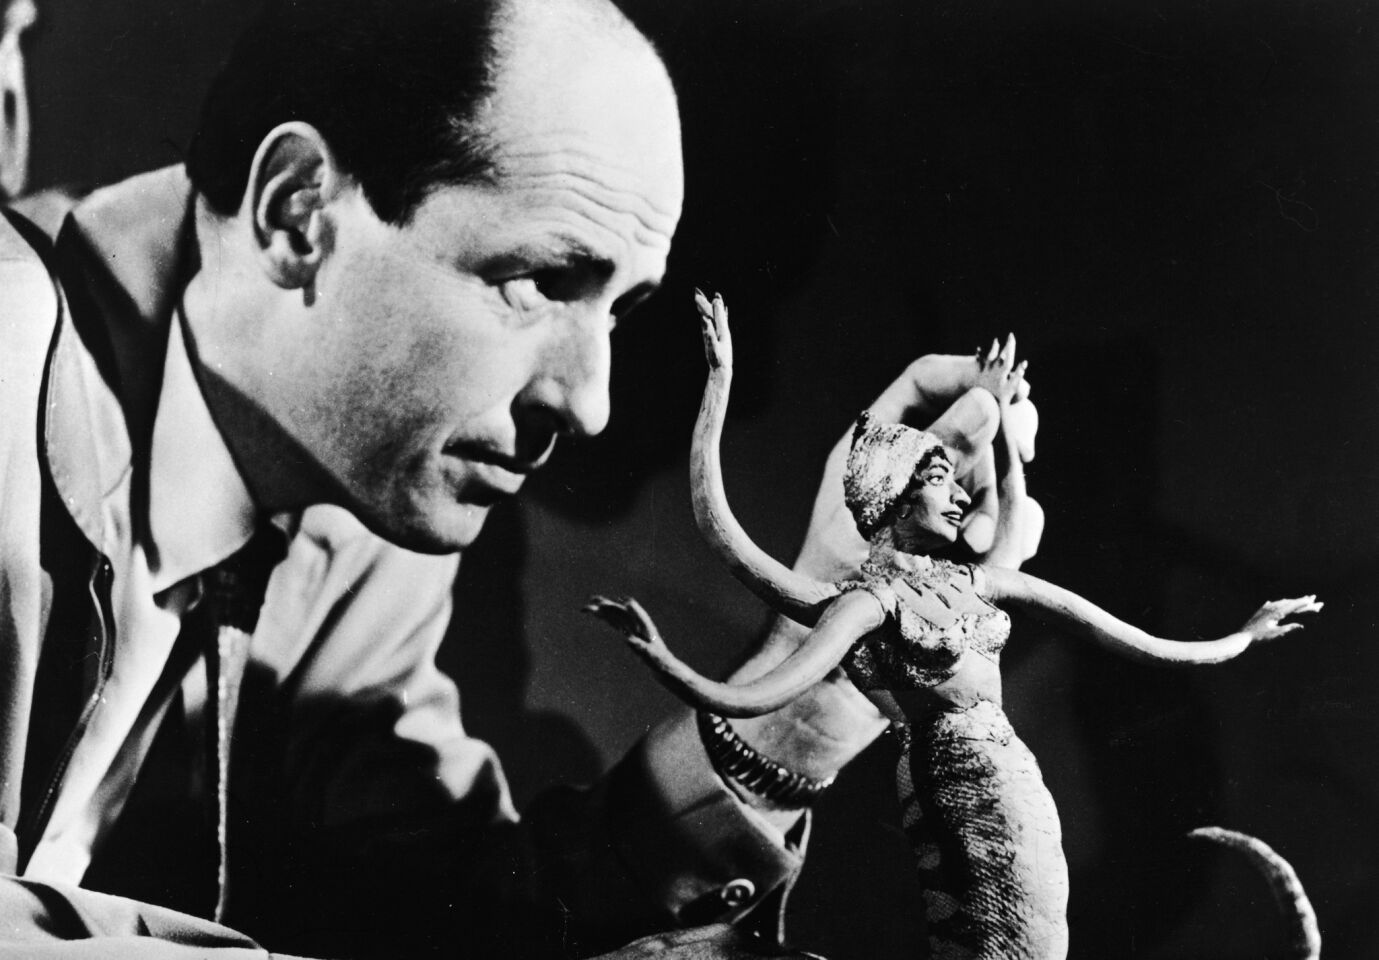 The stop-motion animation legend known for creating special effects for "The Beast From 20,000 Fathoms," "Jason and the Argonauts" and other science fiction film classics became a cult figure who inspired later generations of filmmakers including Steven Spielberg, George Lucas and James Cameron. He was 92. Full obituary Notable deaths of 2012